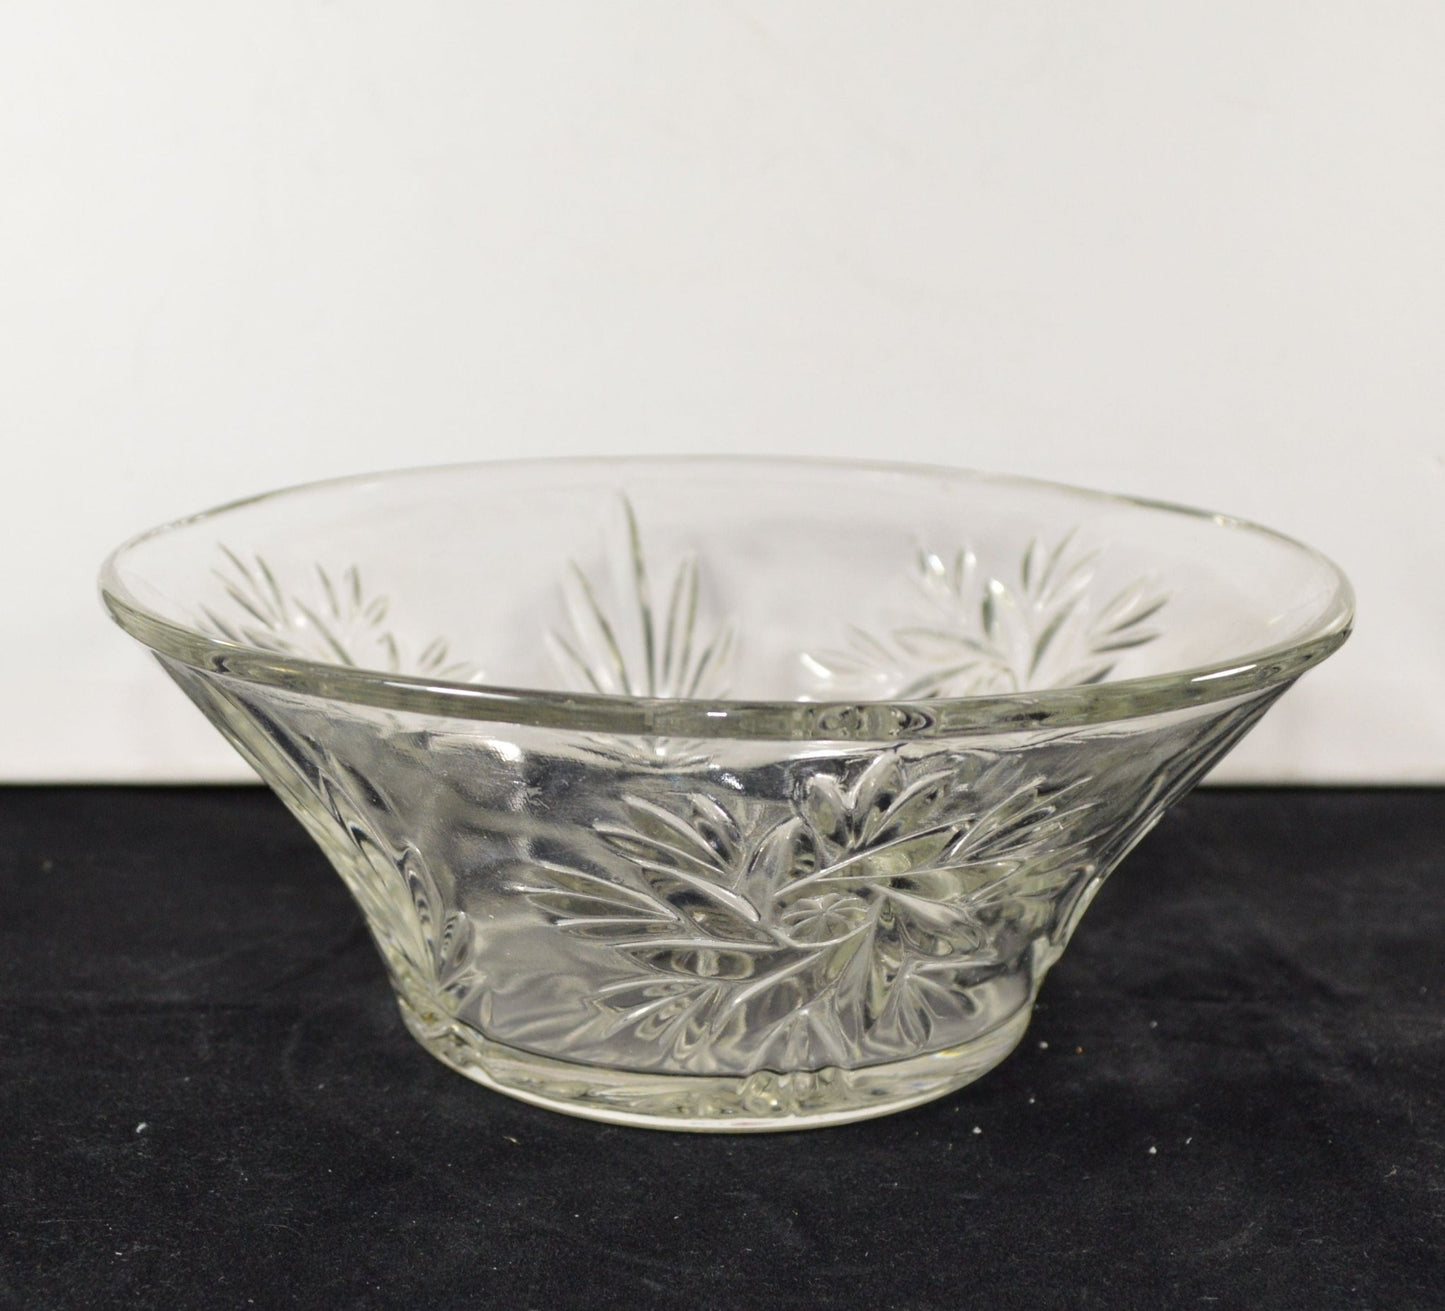 TABLEWARE TWO GLASS FRUIT BOWLS(PREVIOUSLY OWNED) GOOD CONDITION - TMD167207